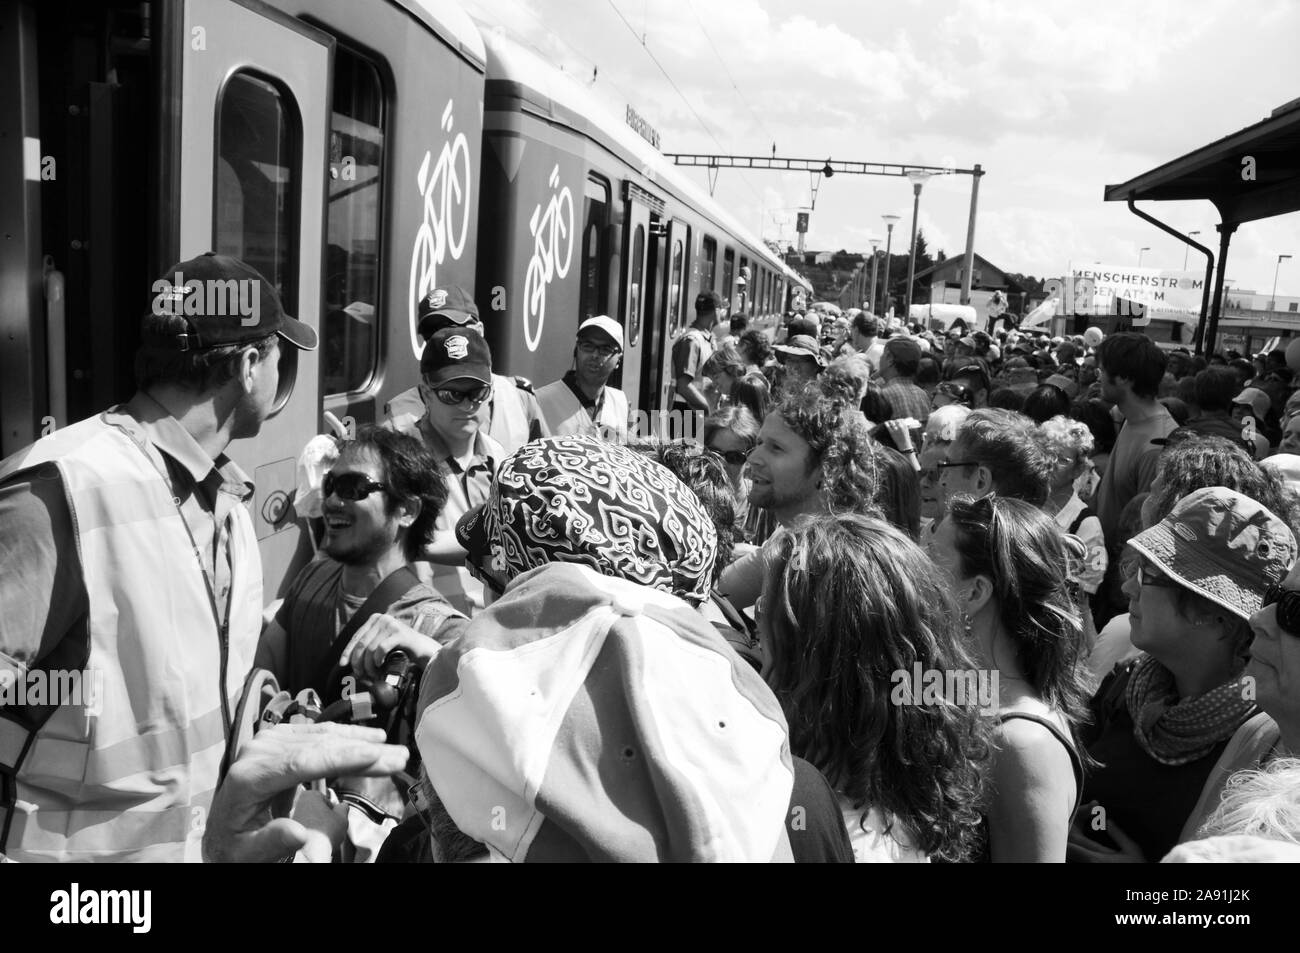 Thousands of people entering the SBB-trains in Döttingen after the anti nuclear protest in Beznau. Stock Photo